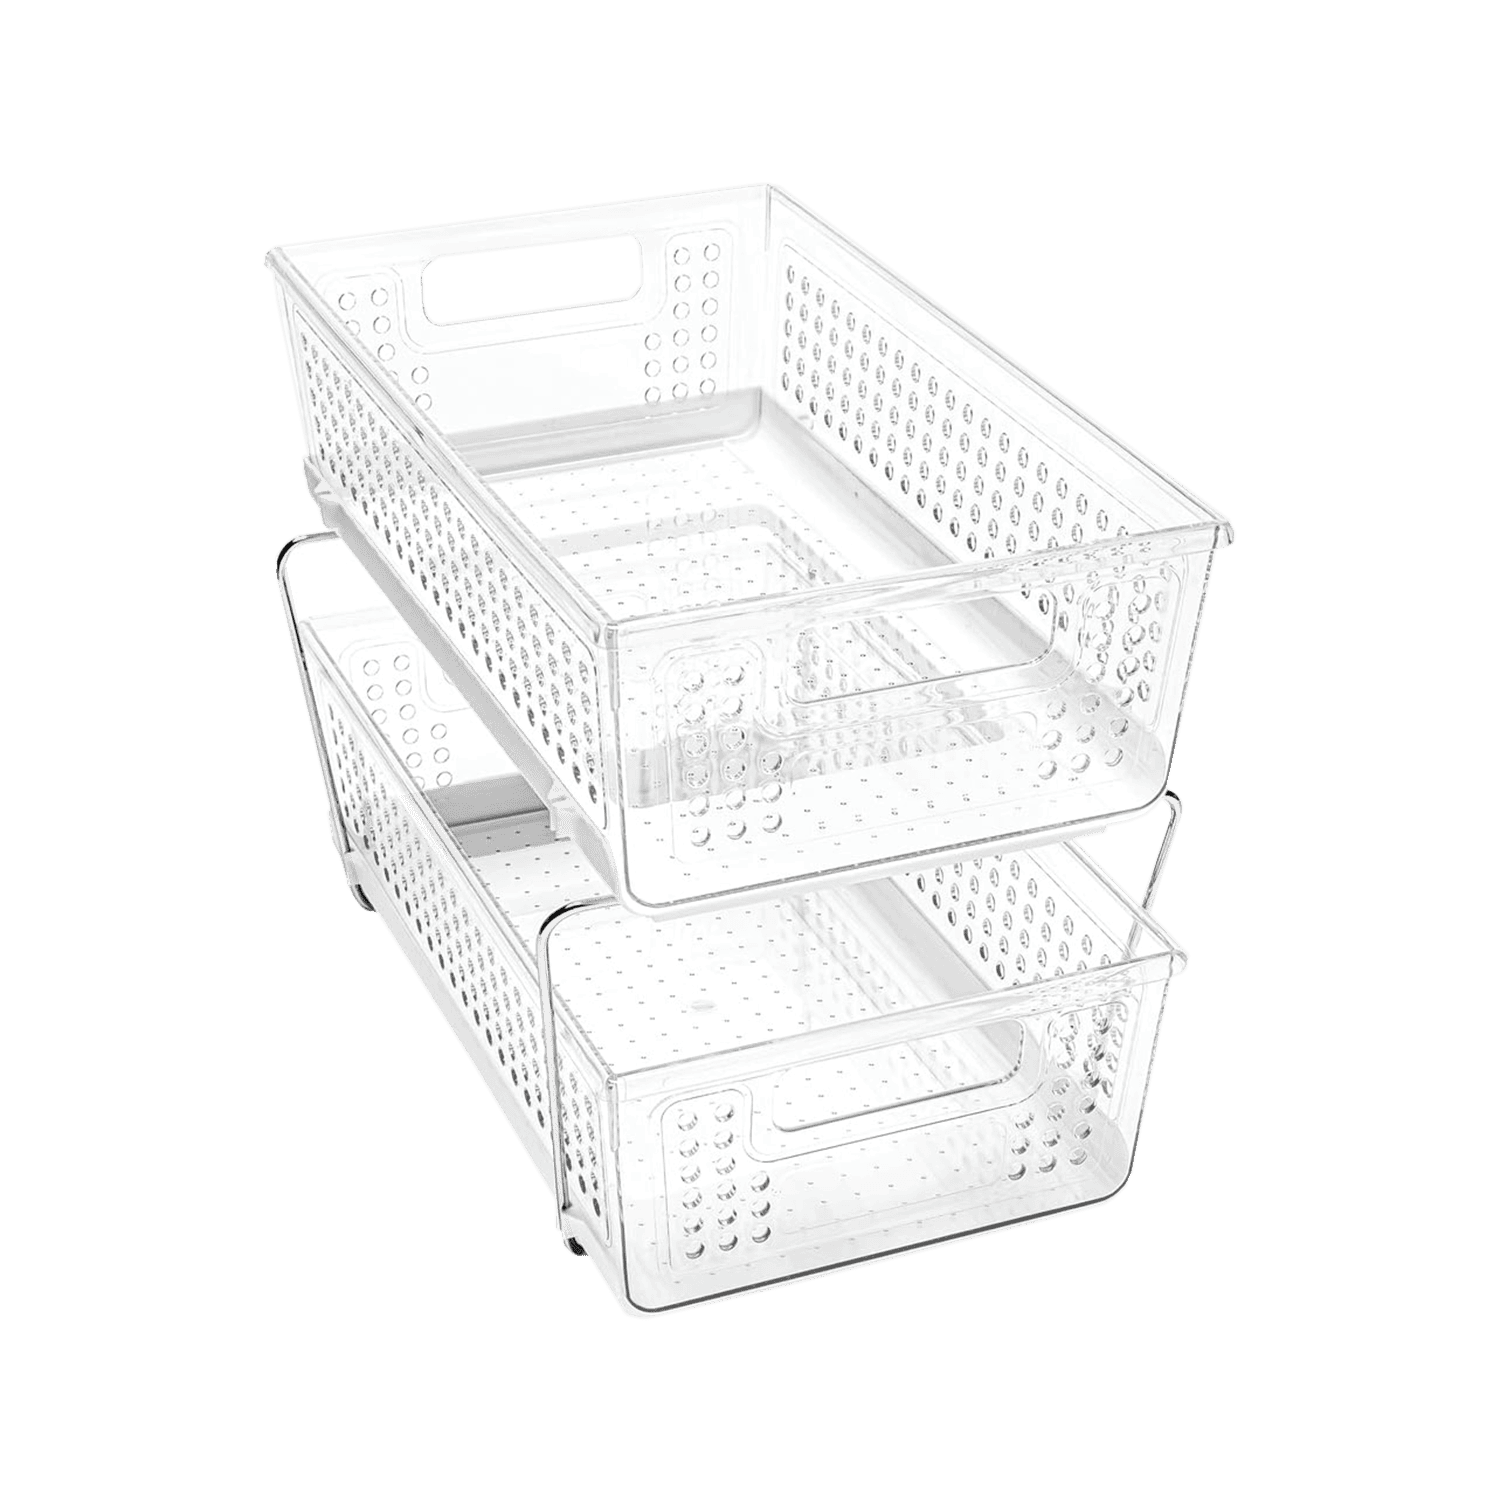 Madesmart 2-Tier Organizer With Dividers Slide-Out Baskets